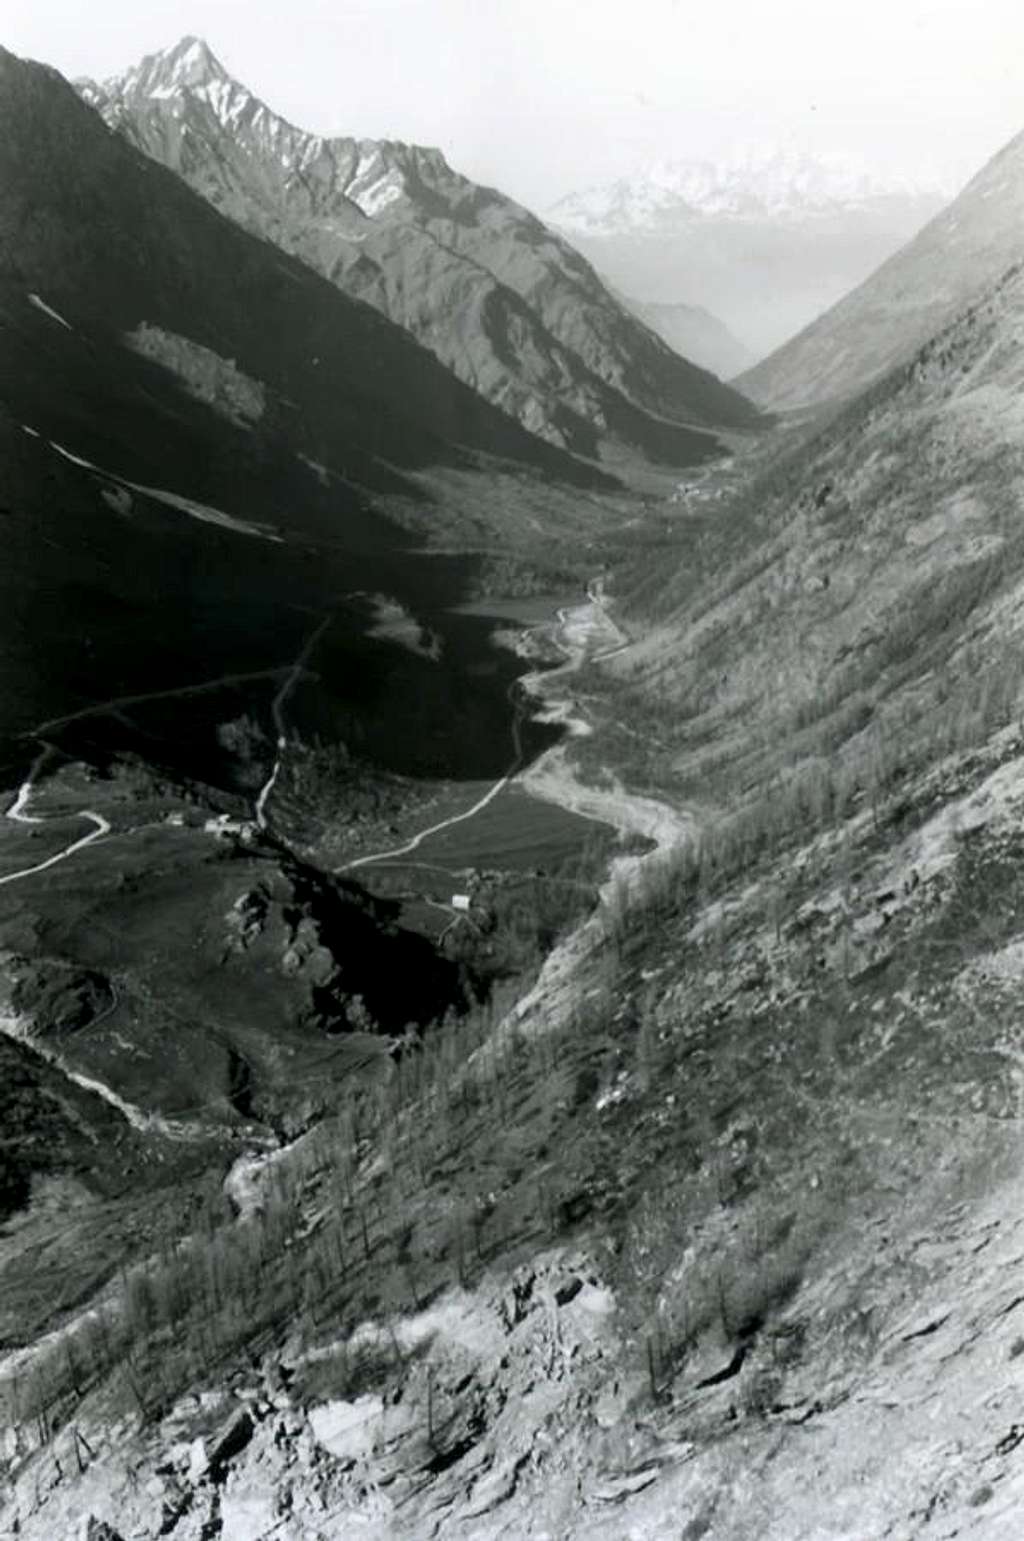 Watershed between Rhemes/Grisenche Valleys from South to North climbing Vaudala Walloon 1983